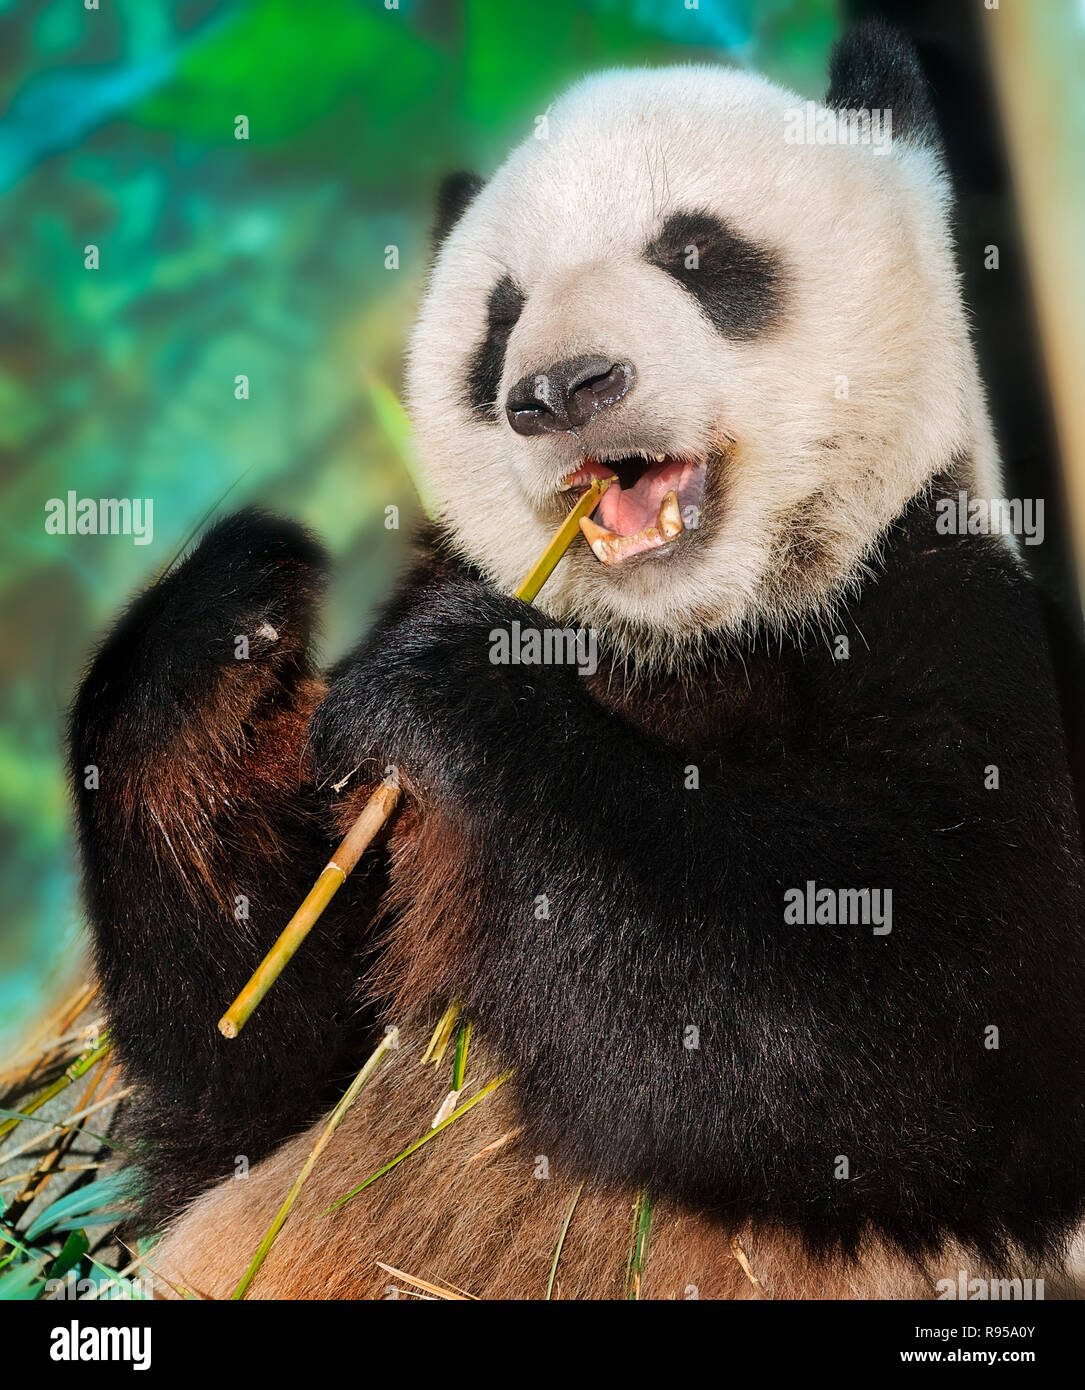 A giant panda bear (Ailuropoda melanoleuca) munches on bamboo, September 8, 2015, at the Memphis Zoo in Memphis, Tennessee. Stock Photo